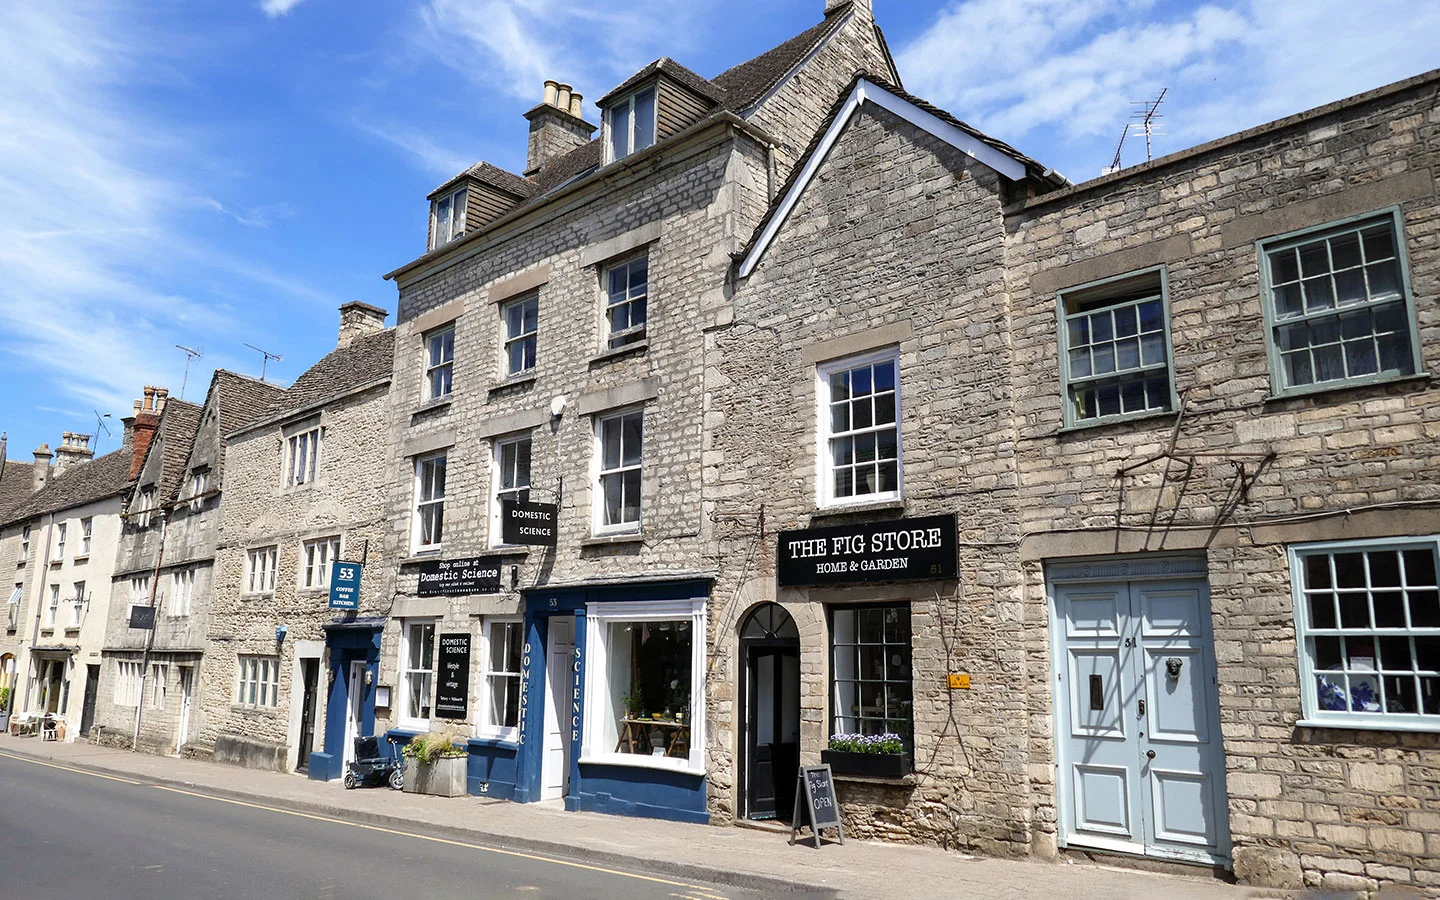 Domestic Science and Café 53 in Tetbury